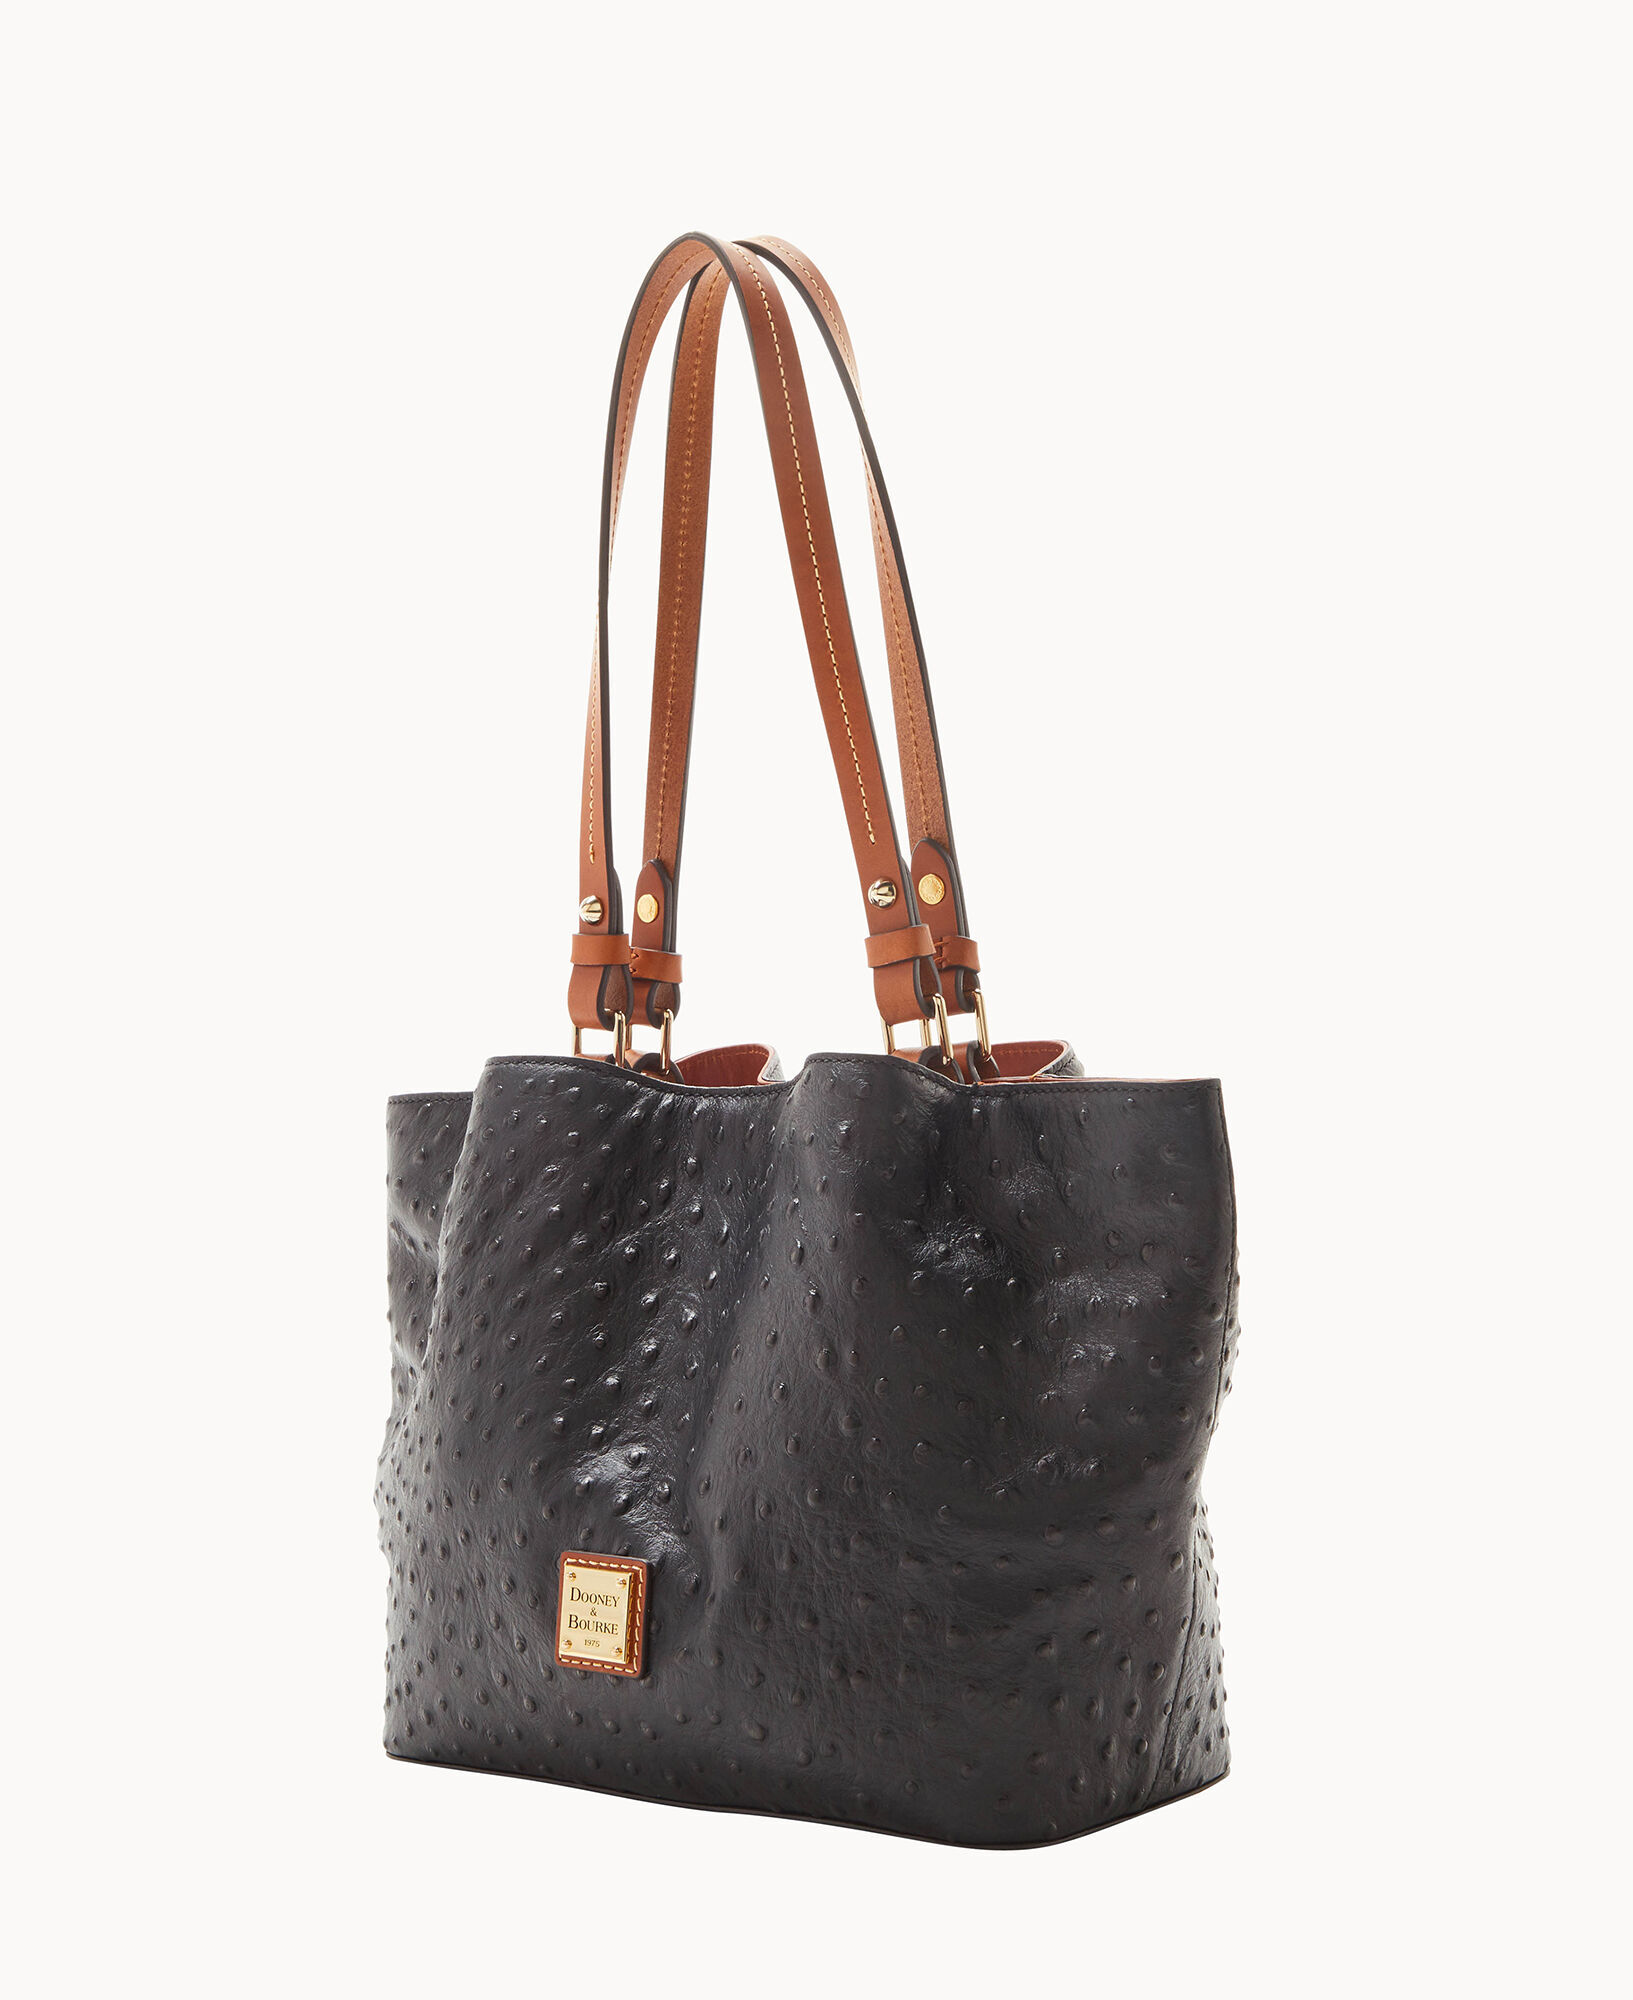 Fashion Ostrich Croc Tote With Bag (Colors: Black, Brown, Pink